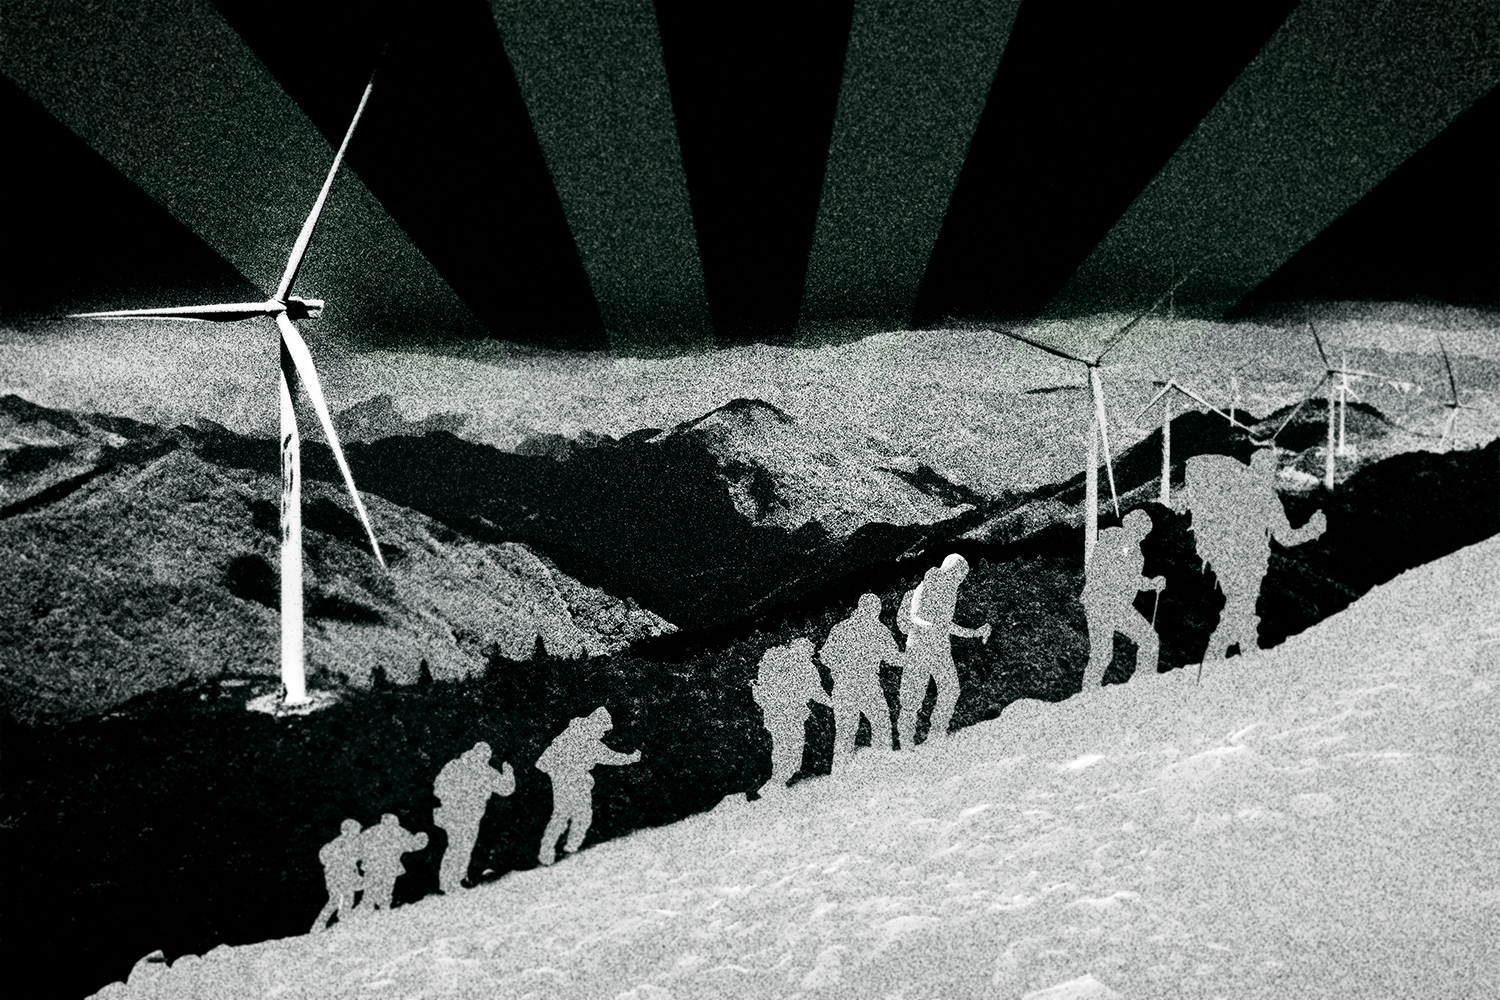 Illustration of hikers in the foreground with wind turbines in the background.